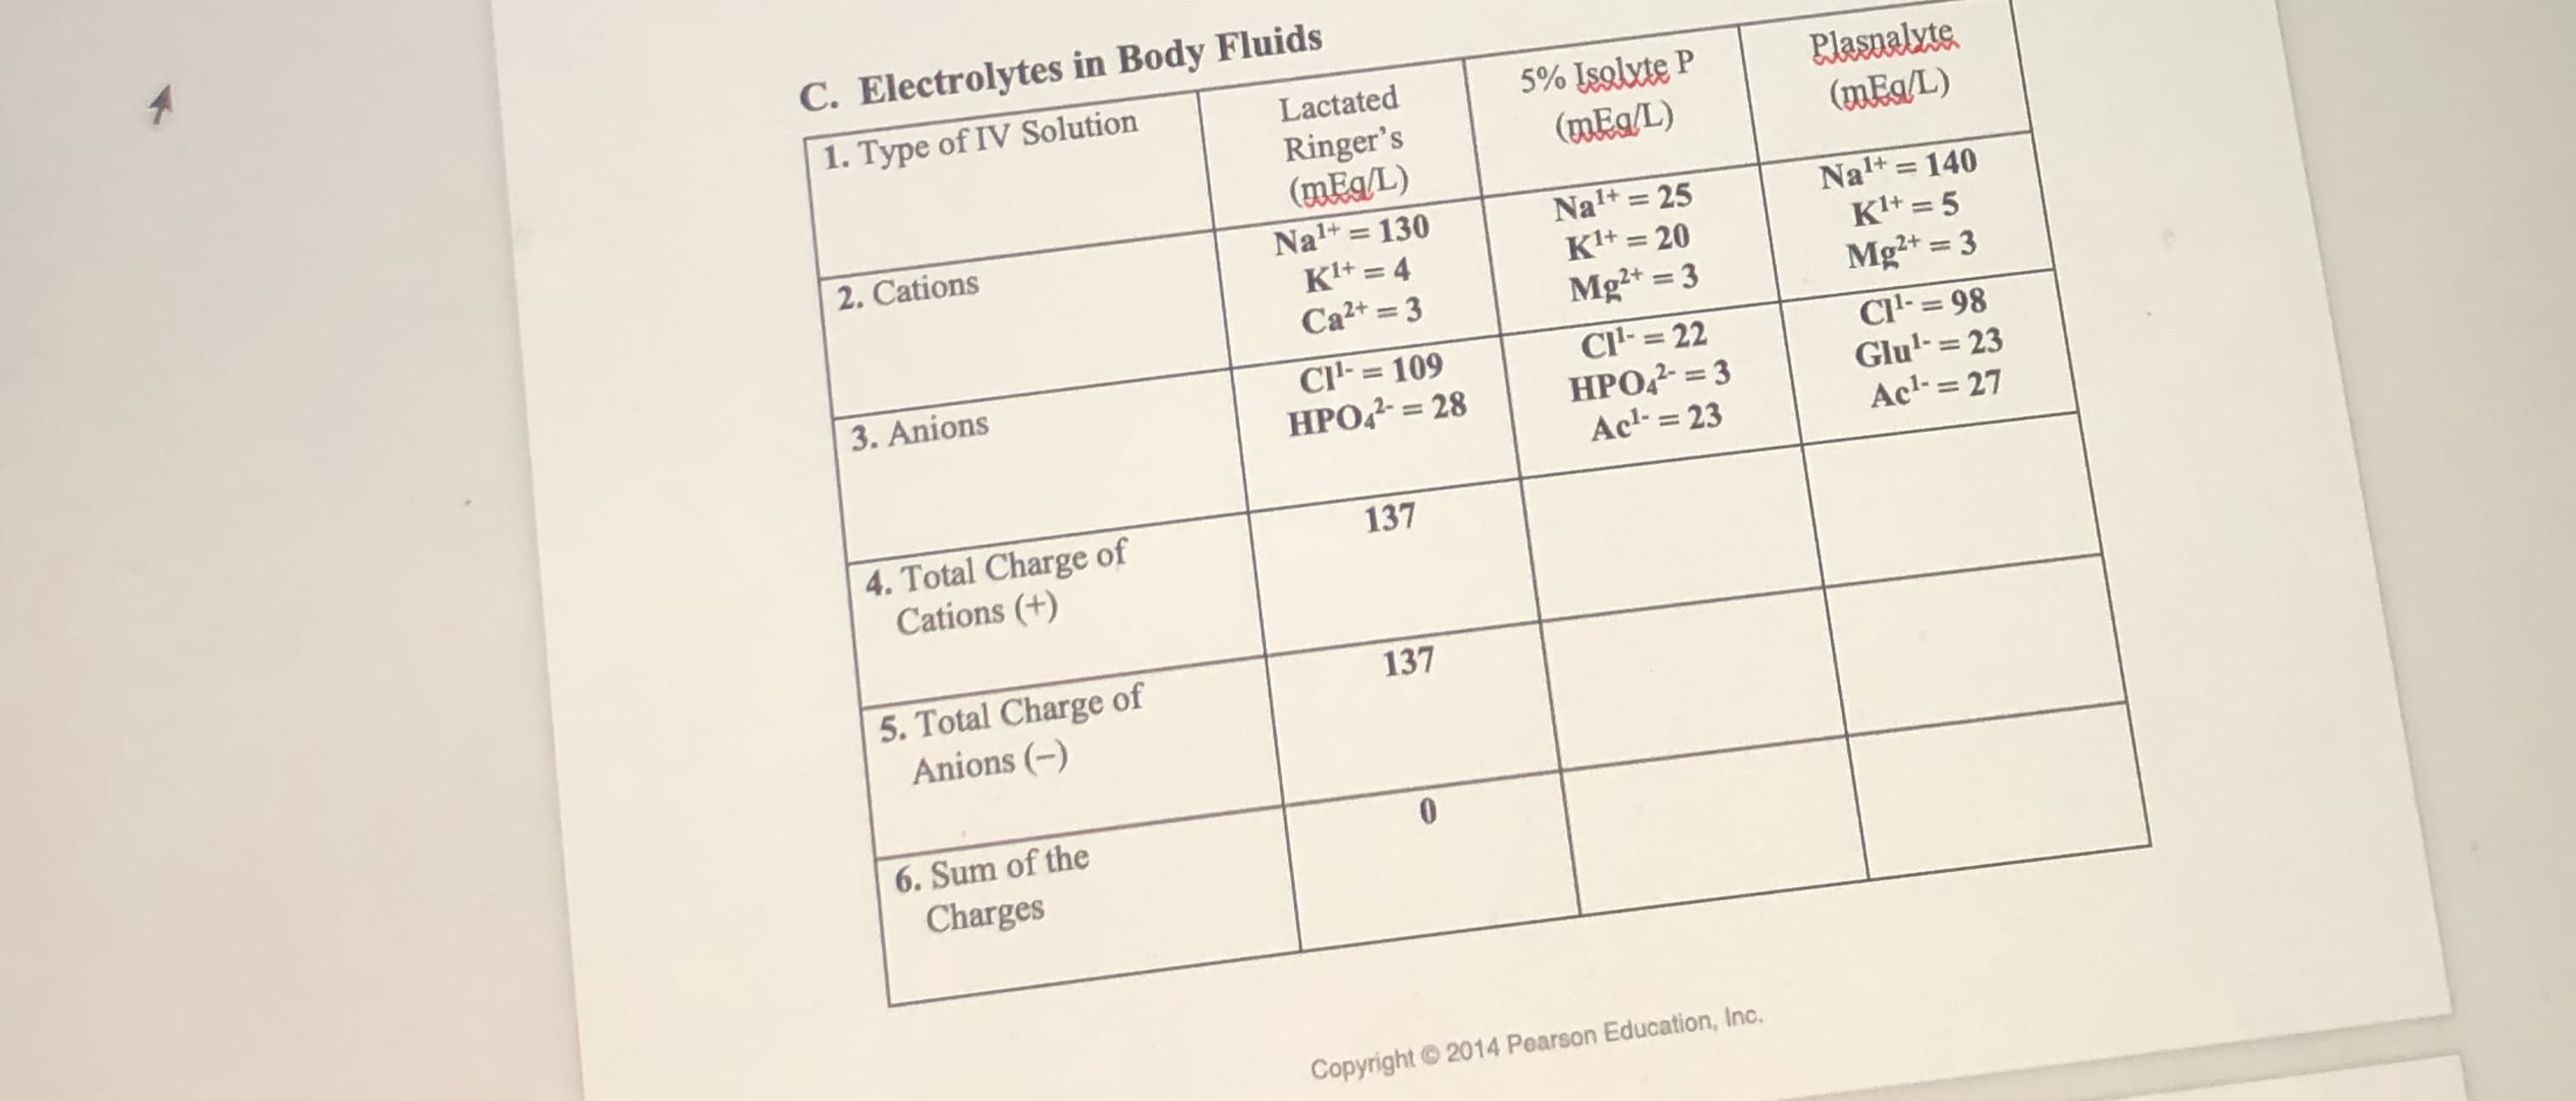 C. Electrolytes in Body Fluids
1. Type of IV Solution
5% Isolute P
(mEa/L)
Plasnalyte
(mEg/L)
Lactated
Ringer's
(mEg/L)
Nal+ = 130
Klt = 4
Ca2+ = 3
Nal+ = 25
K+ = 20
Nal+ = 140
Kl+ = 5
2. Cations
%3D
%3D
Mg+ = 3
Mg2+ = 3
CI- = 22
HPO- =3
Acl- = 23
CI- = 98
Glu'-= 23
Acl- = 27
3. Anions
CI'- = 109
%3D
HPO = 28
%3D
%3D
4. Total Charge of
Cations (+)
137
137
5. Total Charge of
Anions (-)
6. Sum of the
Charges
Copyright 2014 Pearson Education, Inc.
